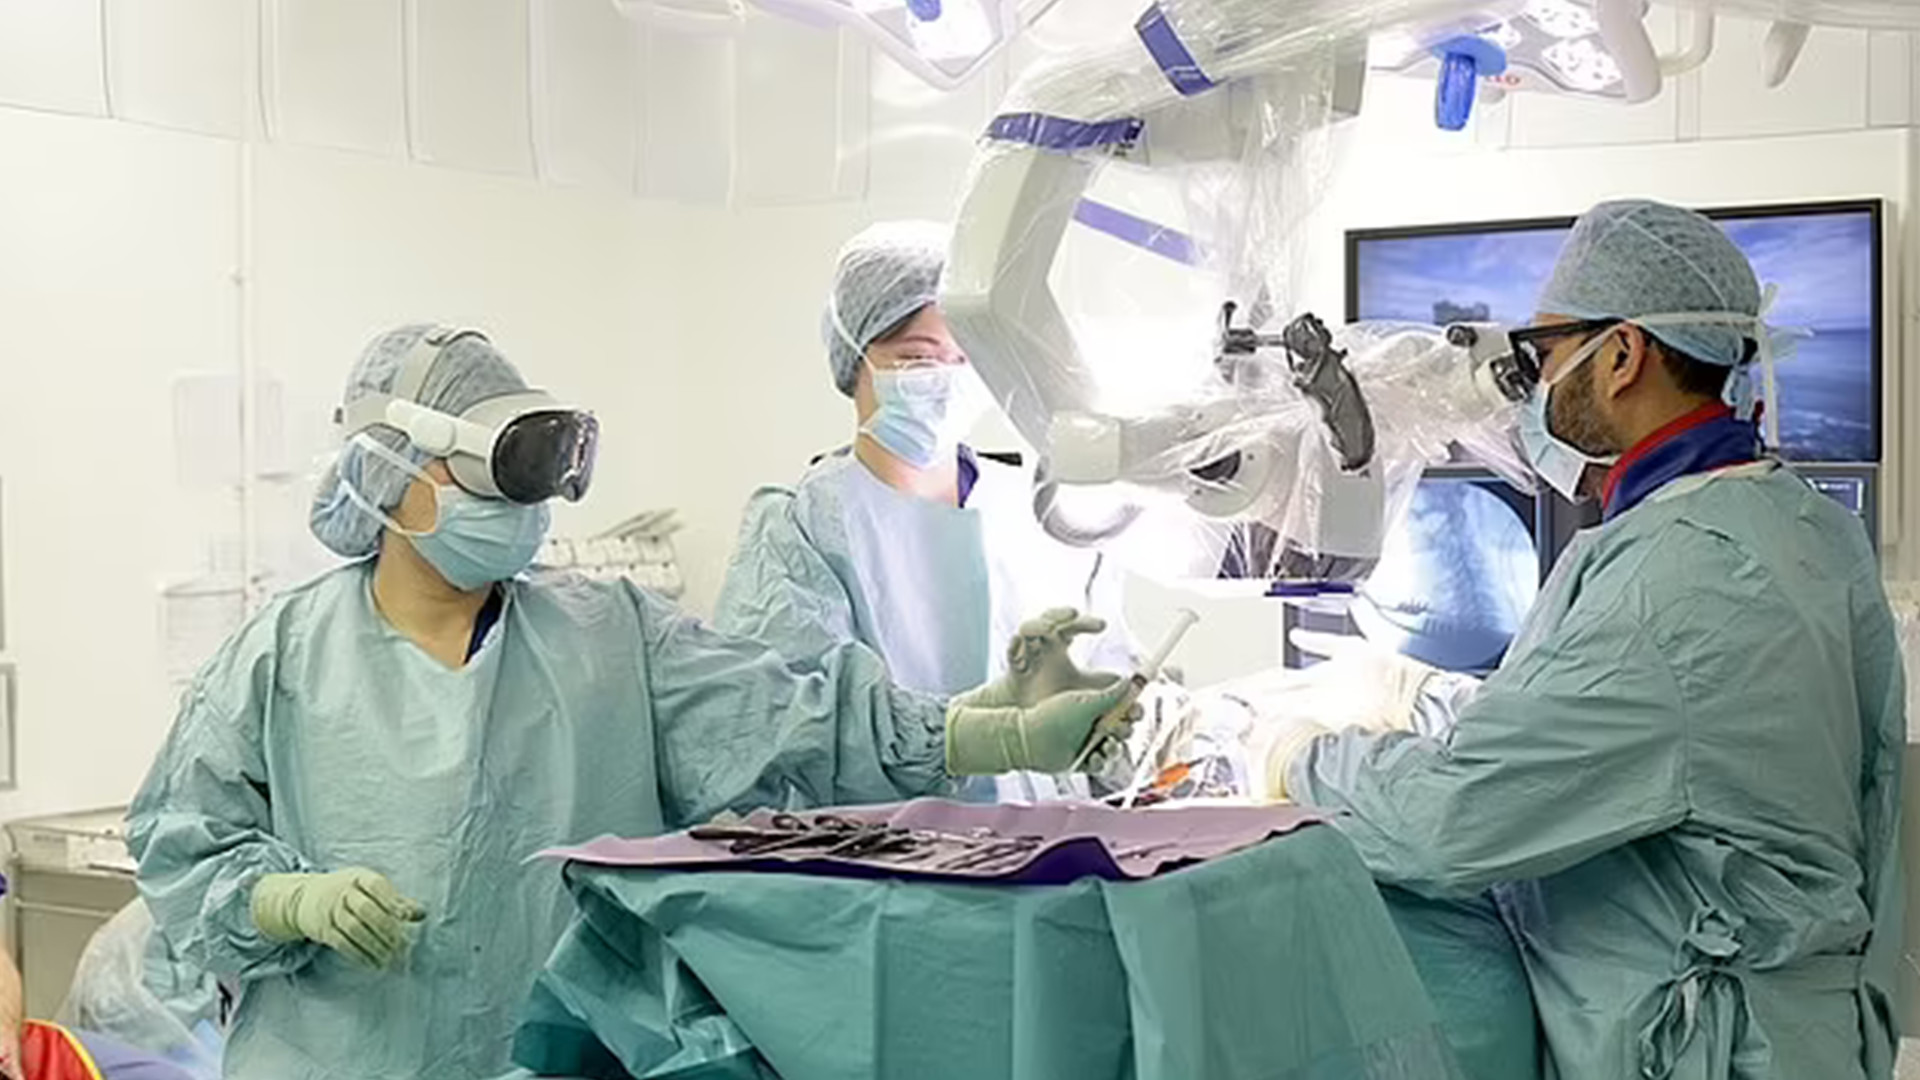 Vision Pro inside surgery room